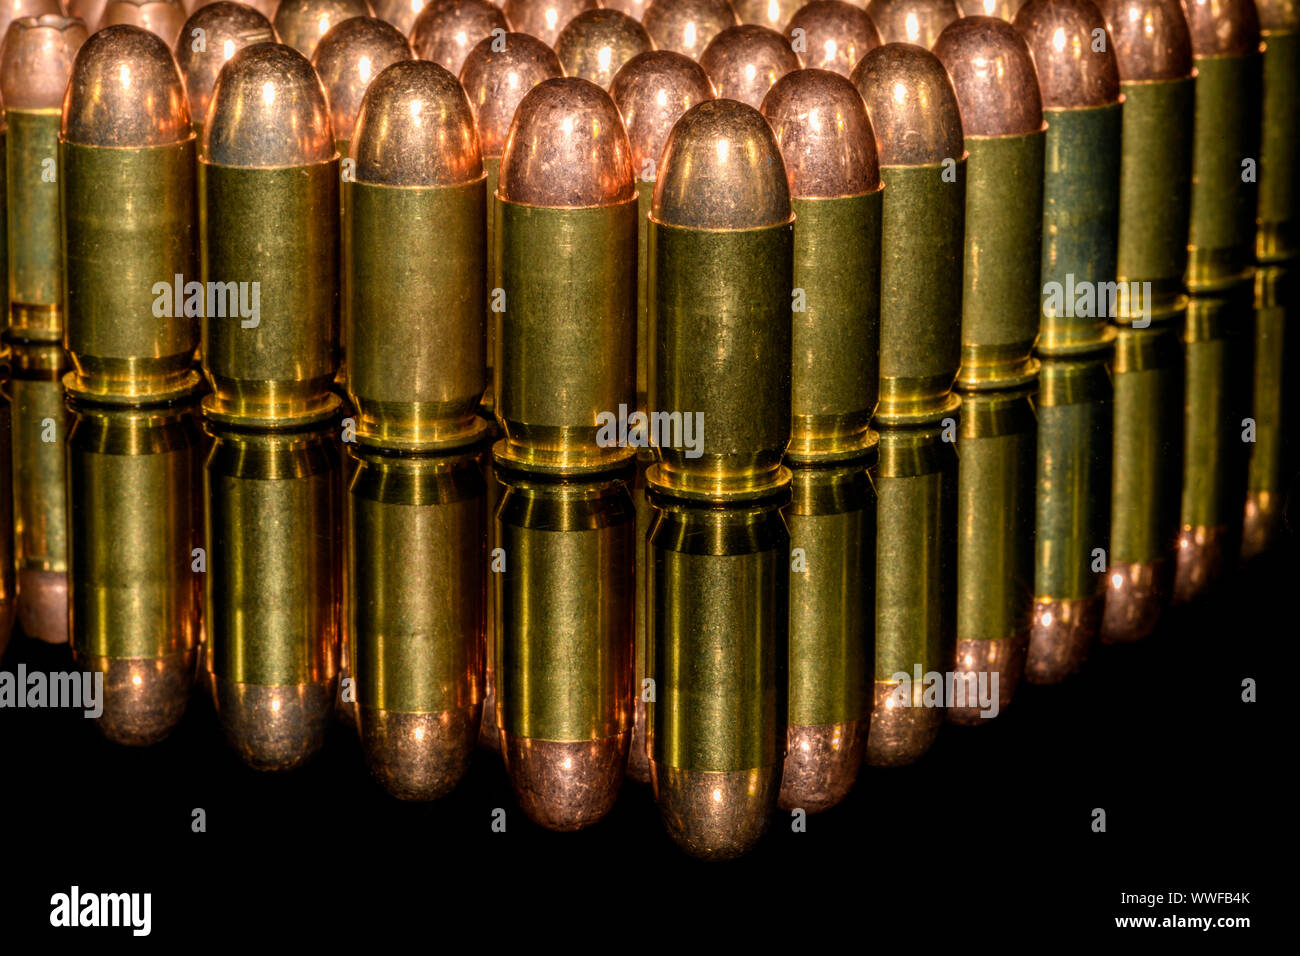 Large lead bullet, bullet ammunition soil discovery lead metal, cast Loden bullet  ball shaped lead projectile archeology war military rifle firearm  standardization militaria Stock Photo - Alamy